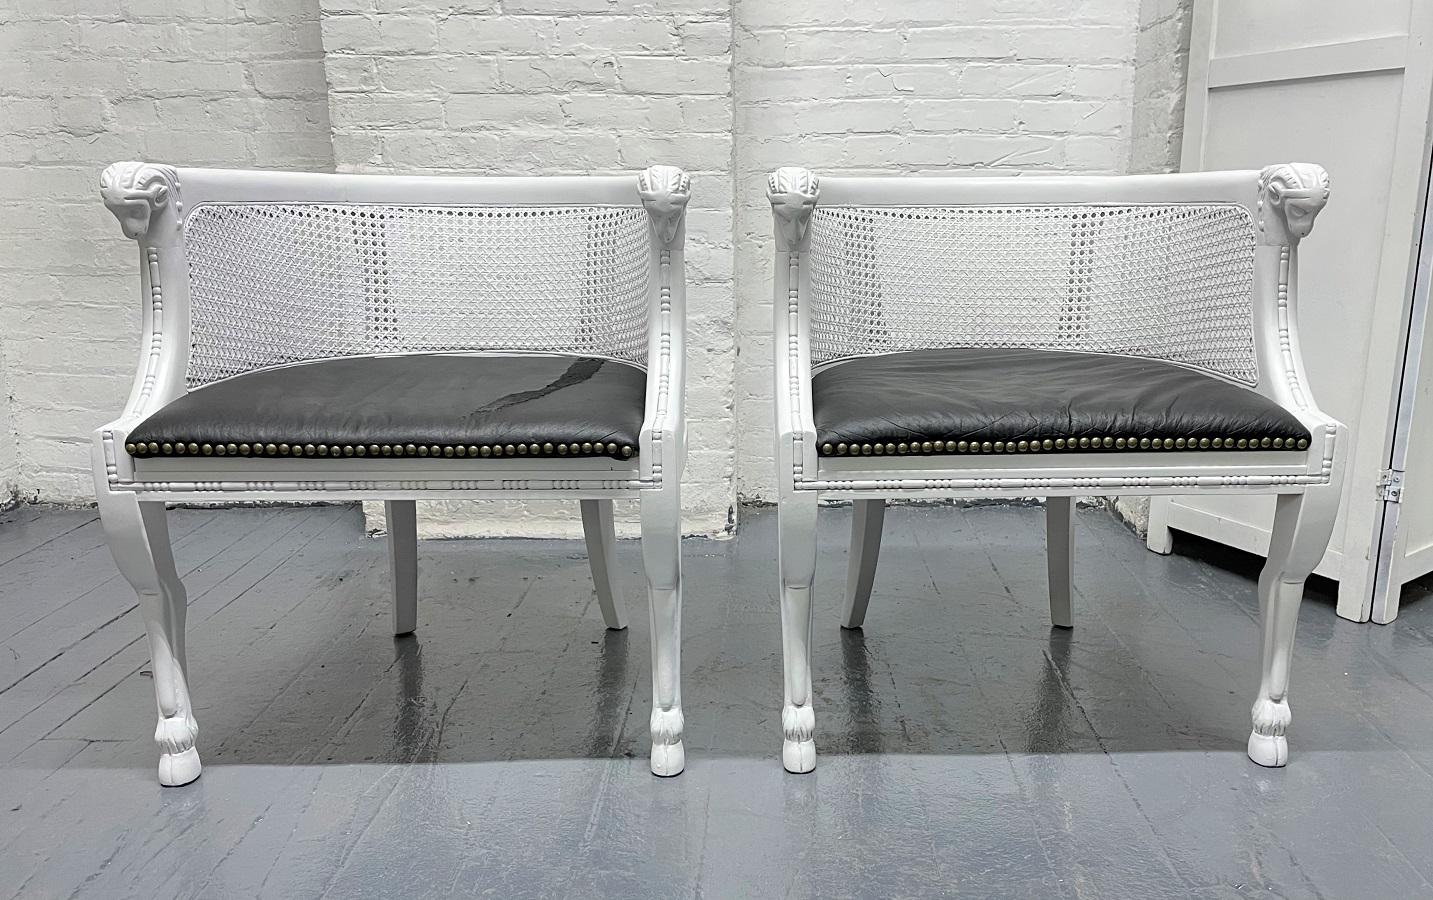 Pair of Neoclassical style ram's head chairs with black vinyl seats. The chairs have caned backs and sides with a solid wood, white painted frame. Carved ram's head to the front of the arms.